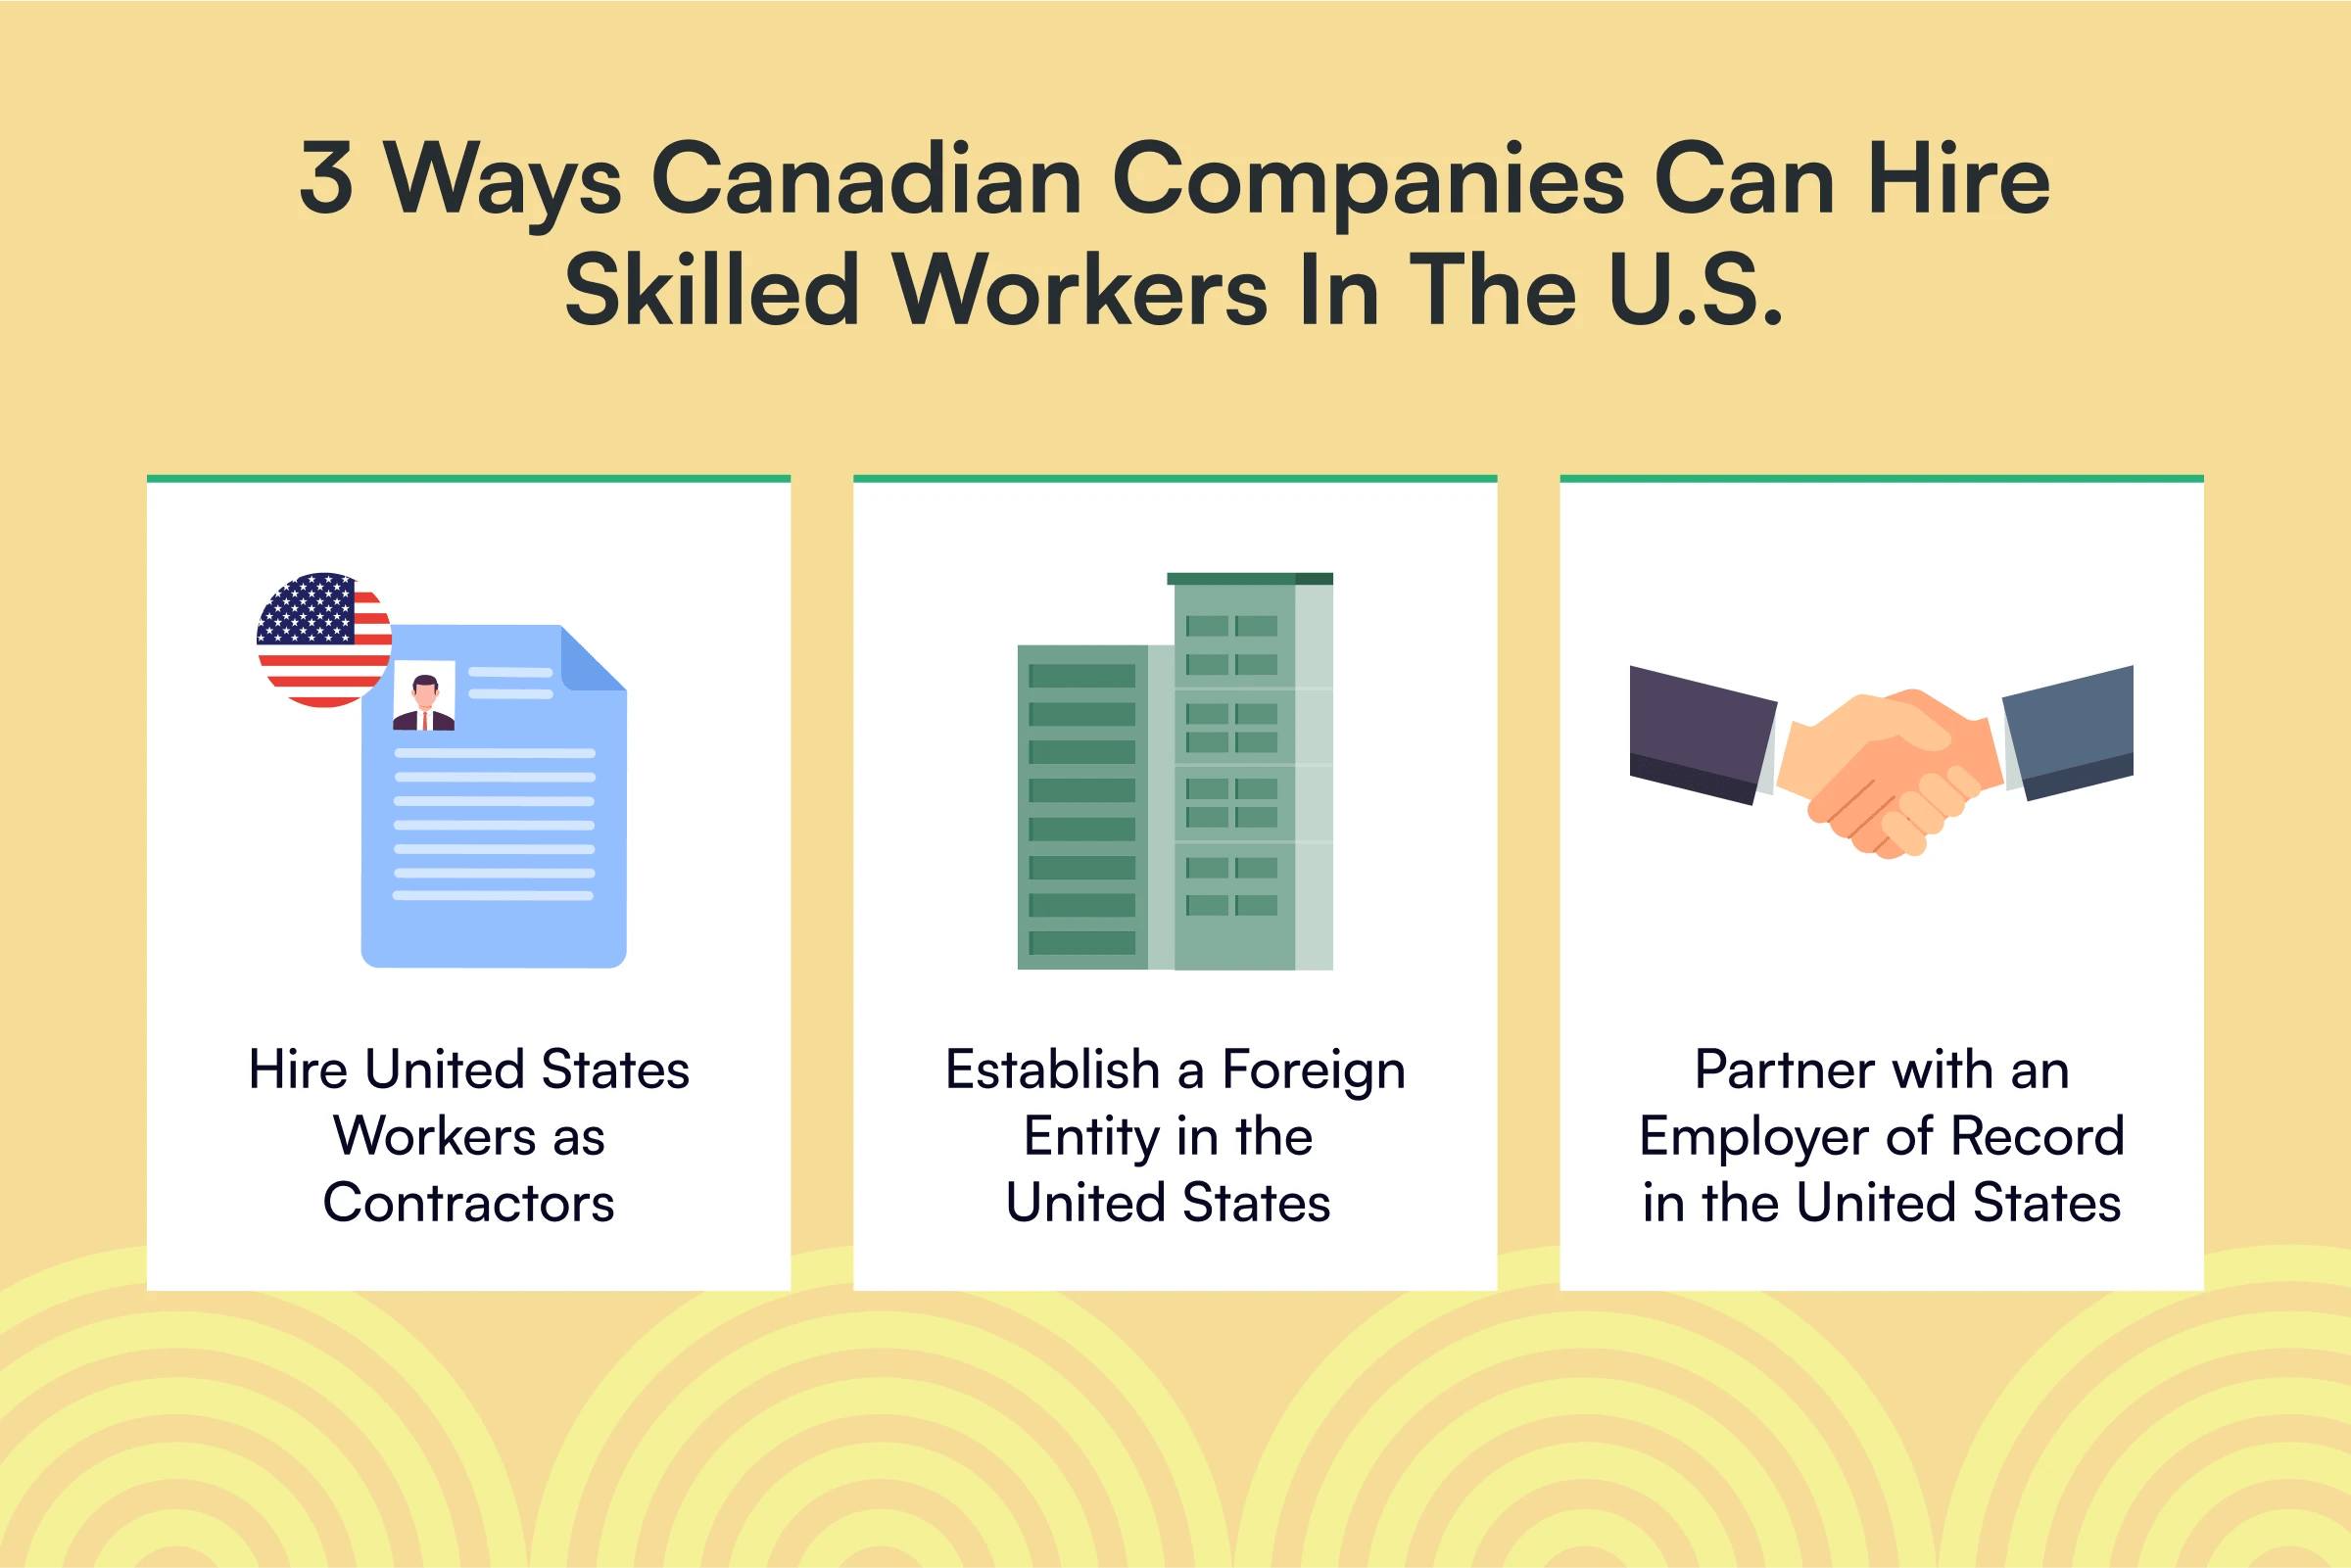 01_3 Ways Canadian Companies Can Hire Skilled Workers in the US